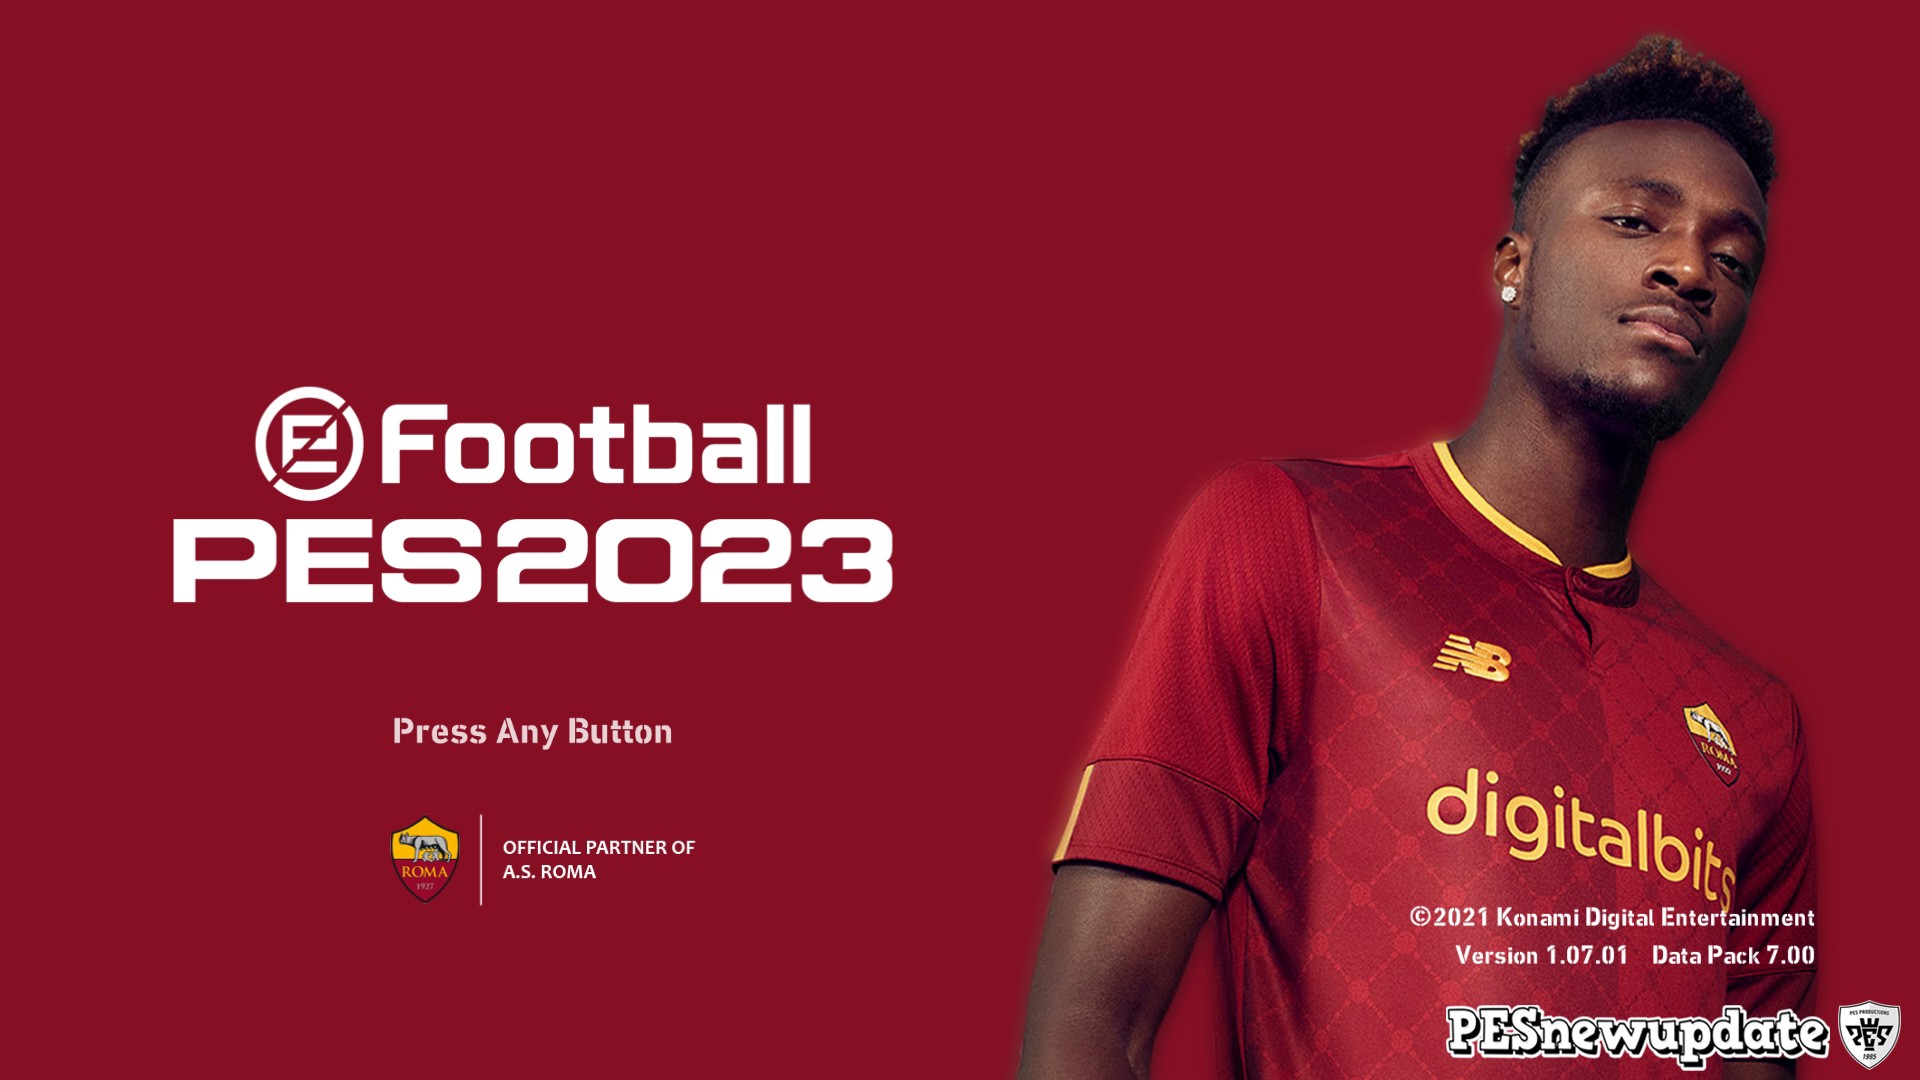 PES 2021 Menu AS Roma 2022 2023 By PESNewupdate PESNewupdate.com. Free Download Latest Pro Evolution Soccer Patch & Updates